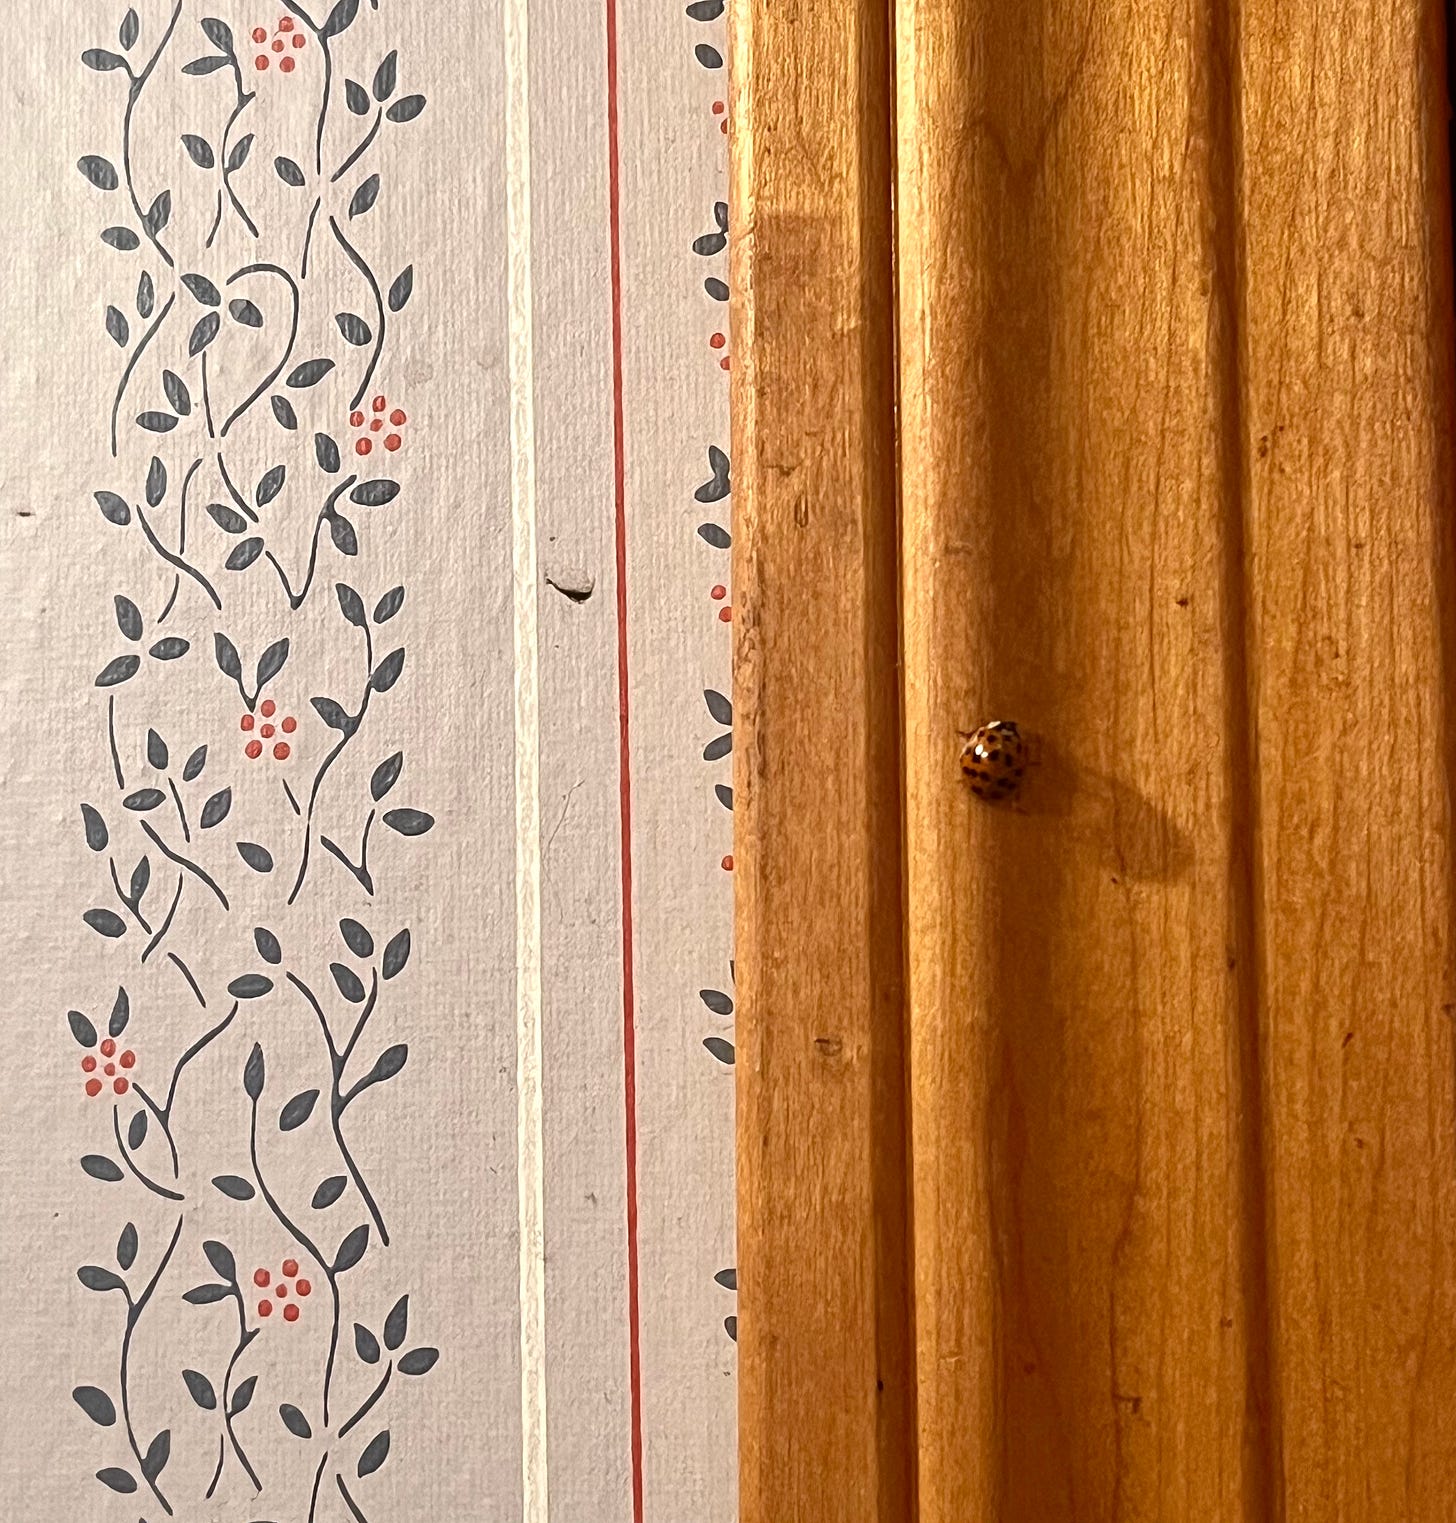 The frame is split in half: the left, floral wallpaper, to the right, wood (a windowframe). And about halfway up the wood, an orange-red ladybug is visible. 